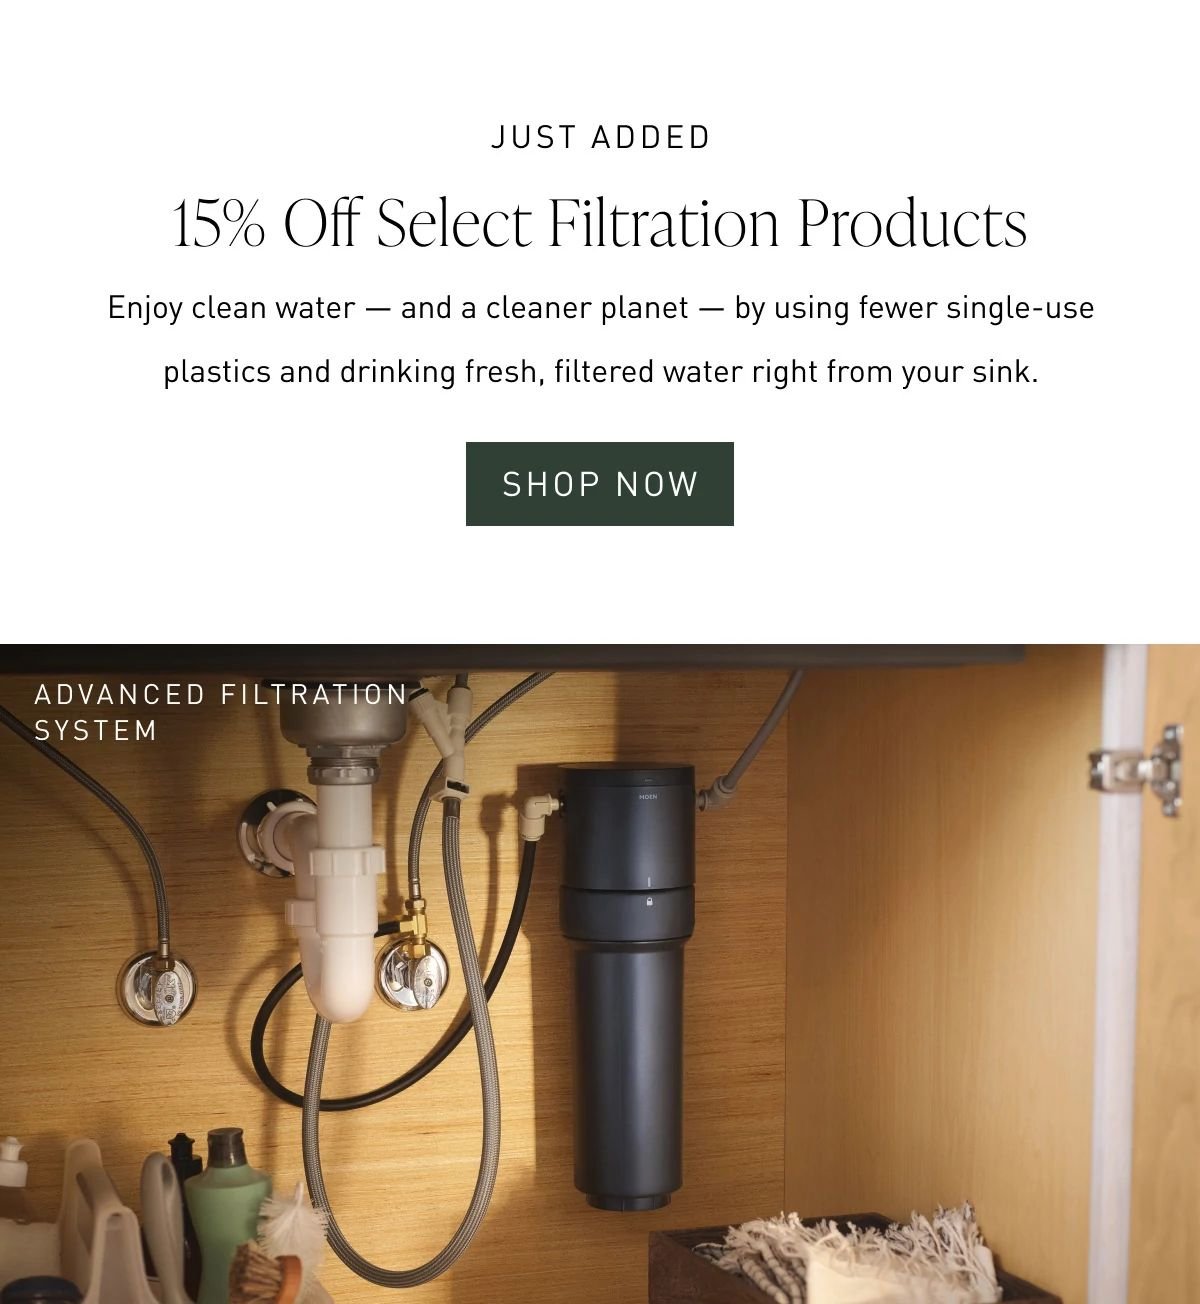 Just Added 15% Off Select Filtration Products | Enjoy clean water — and a cleaner planet — by using fewer single-use plastics and drinking fresh, filtered water right from your sink. Shop Now >